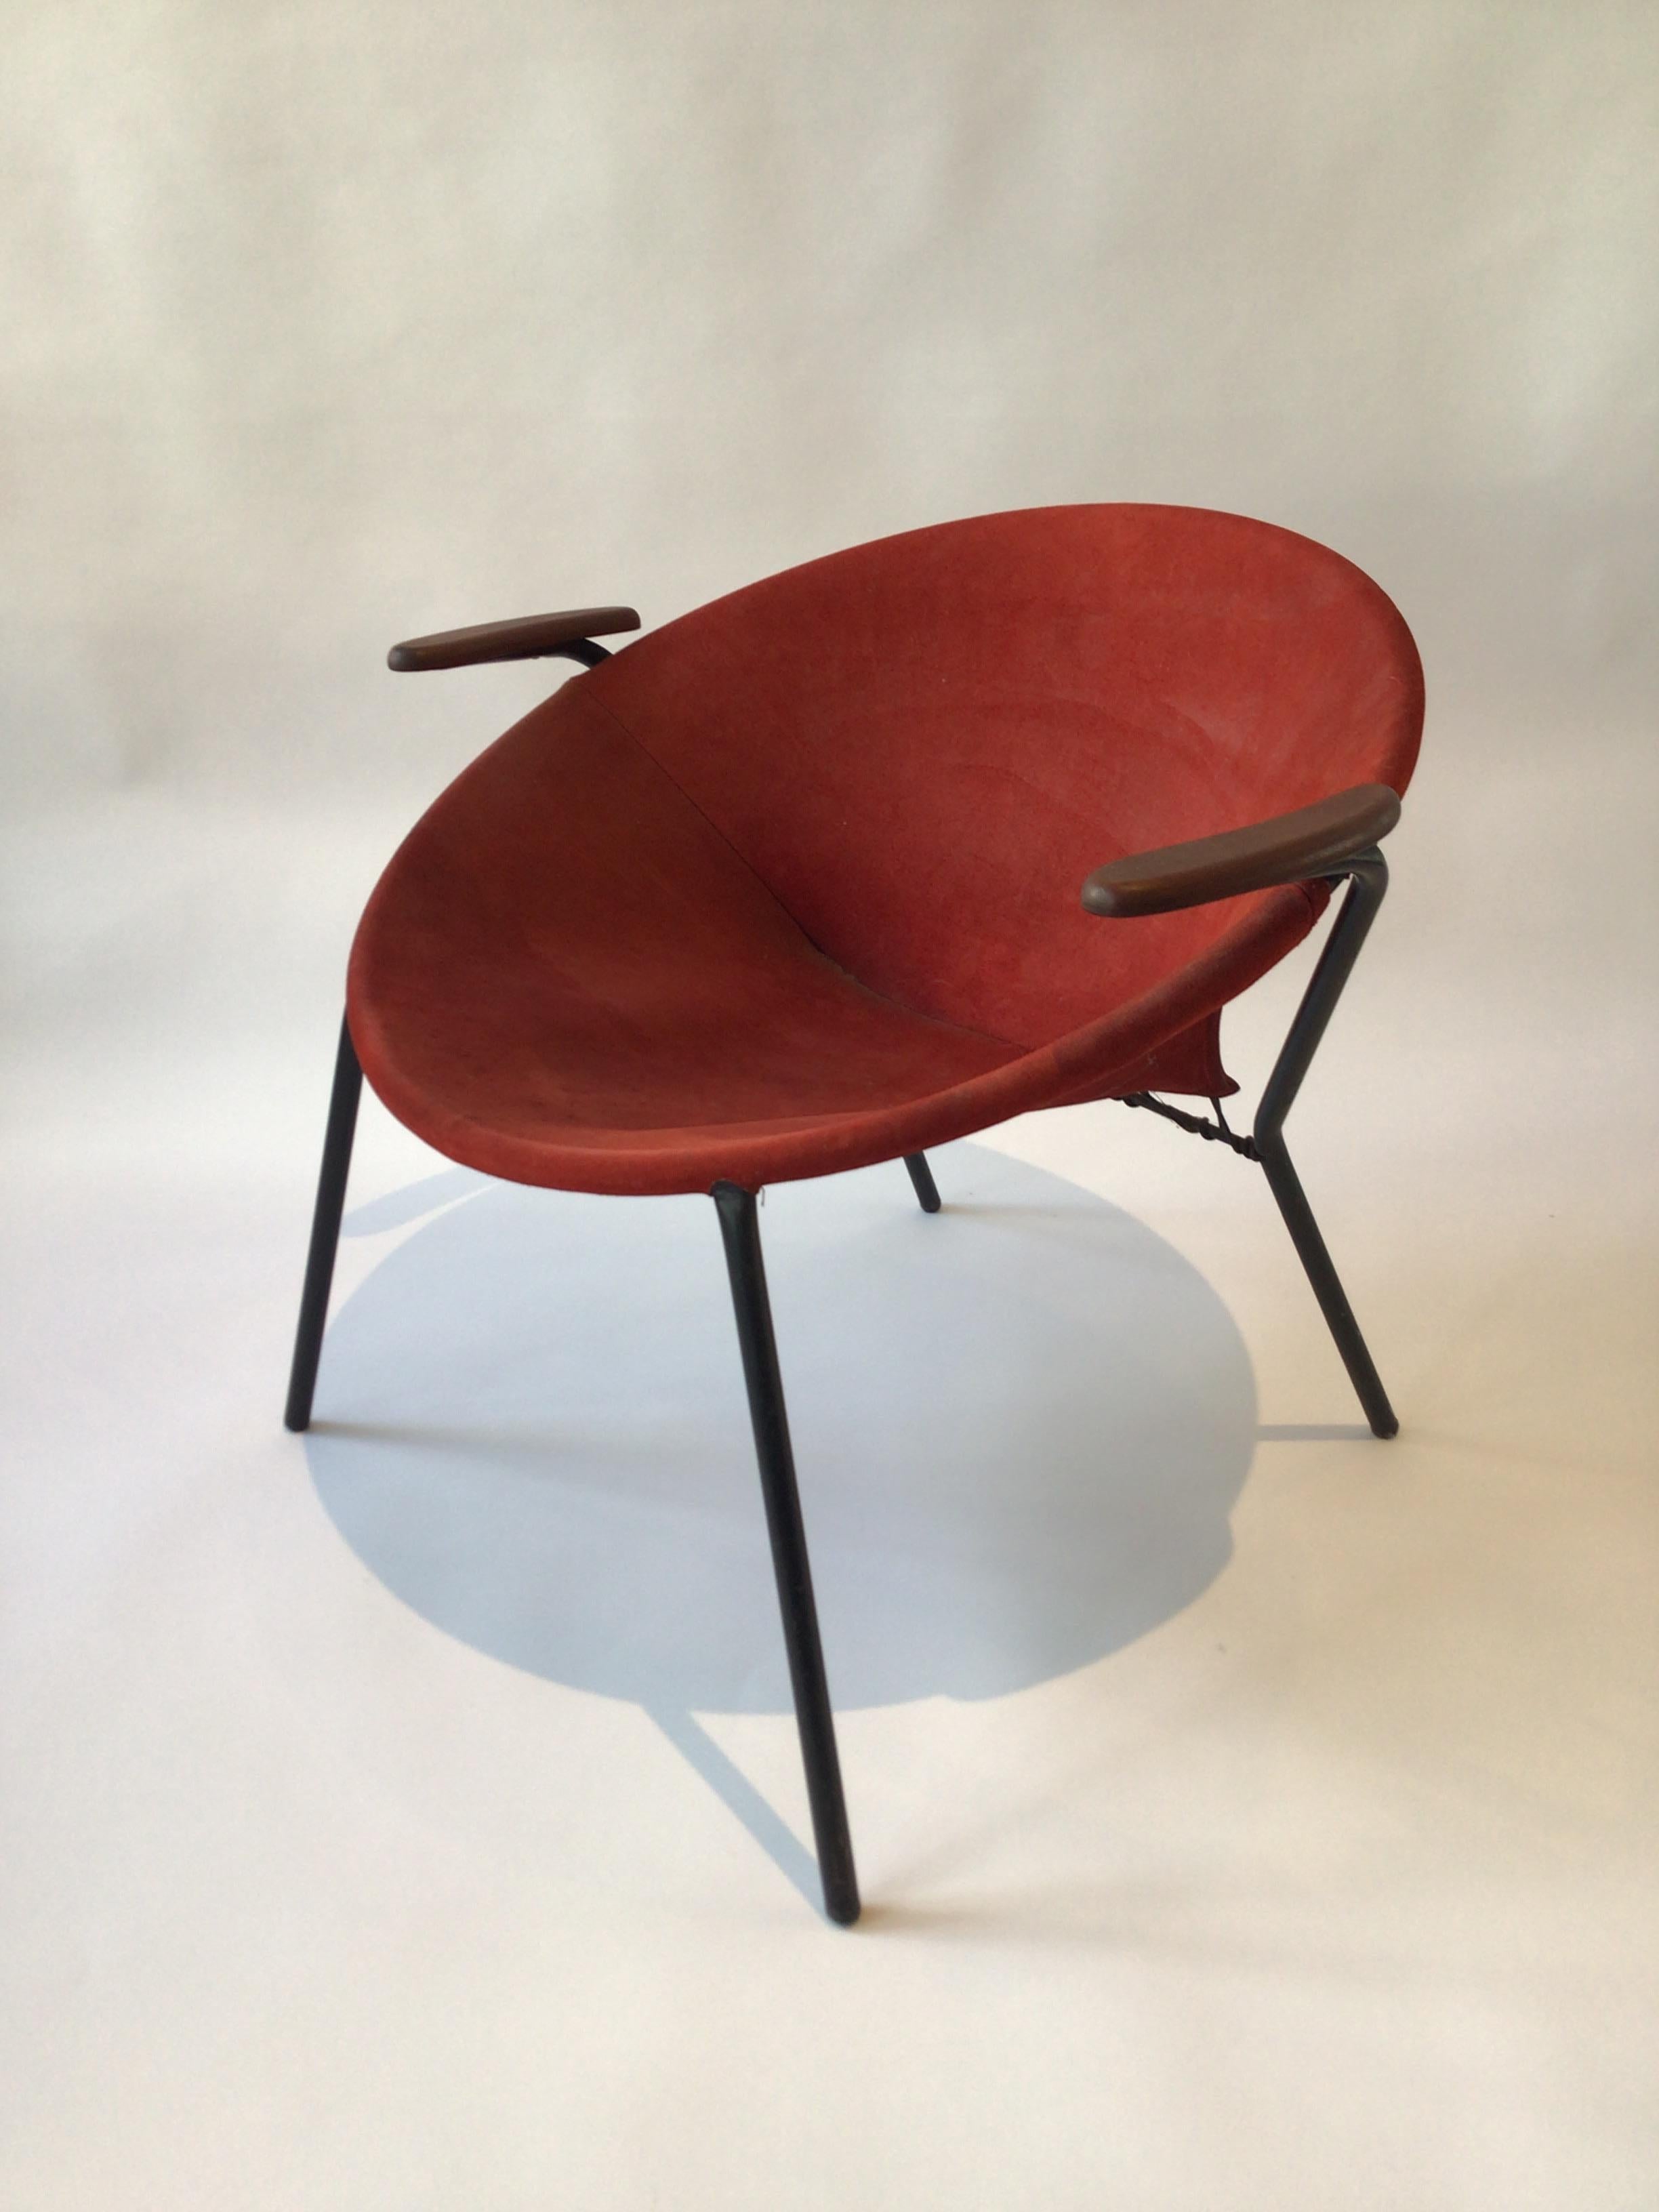 1960s Hans Olsen Balloon / Hoop chair in red suede. Teak arms, iron legs. Purchased from a Southampton, NY estate.